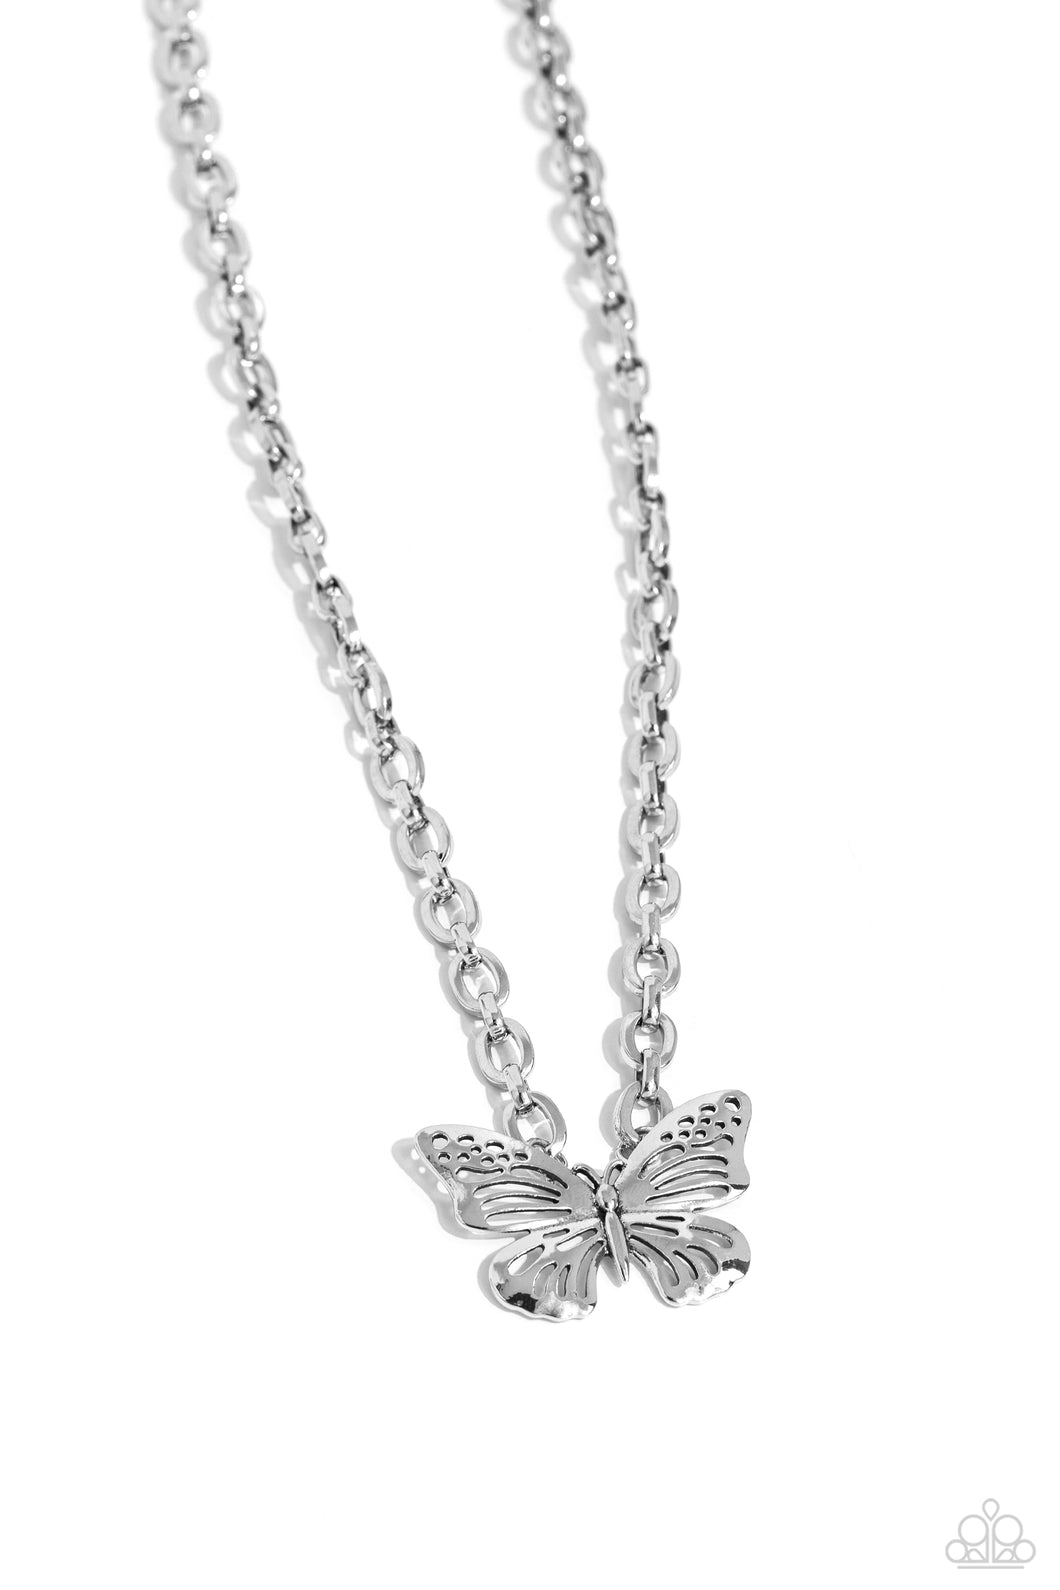 Midair Monochromatic - Silver Necklace